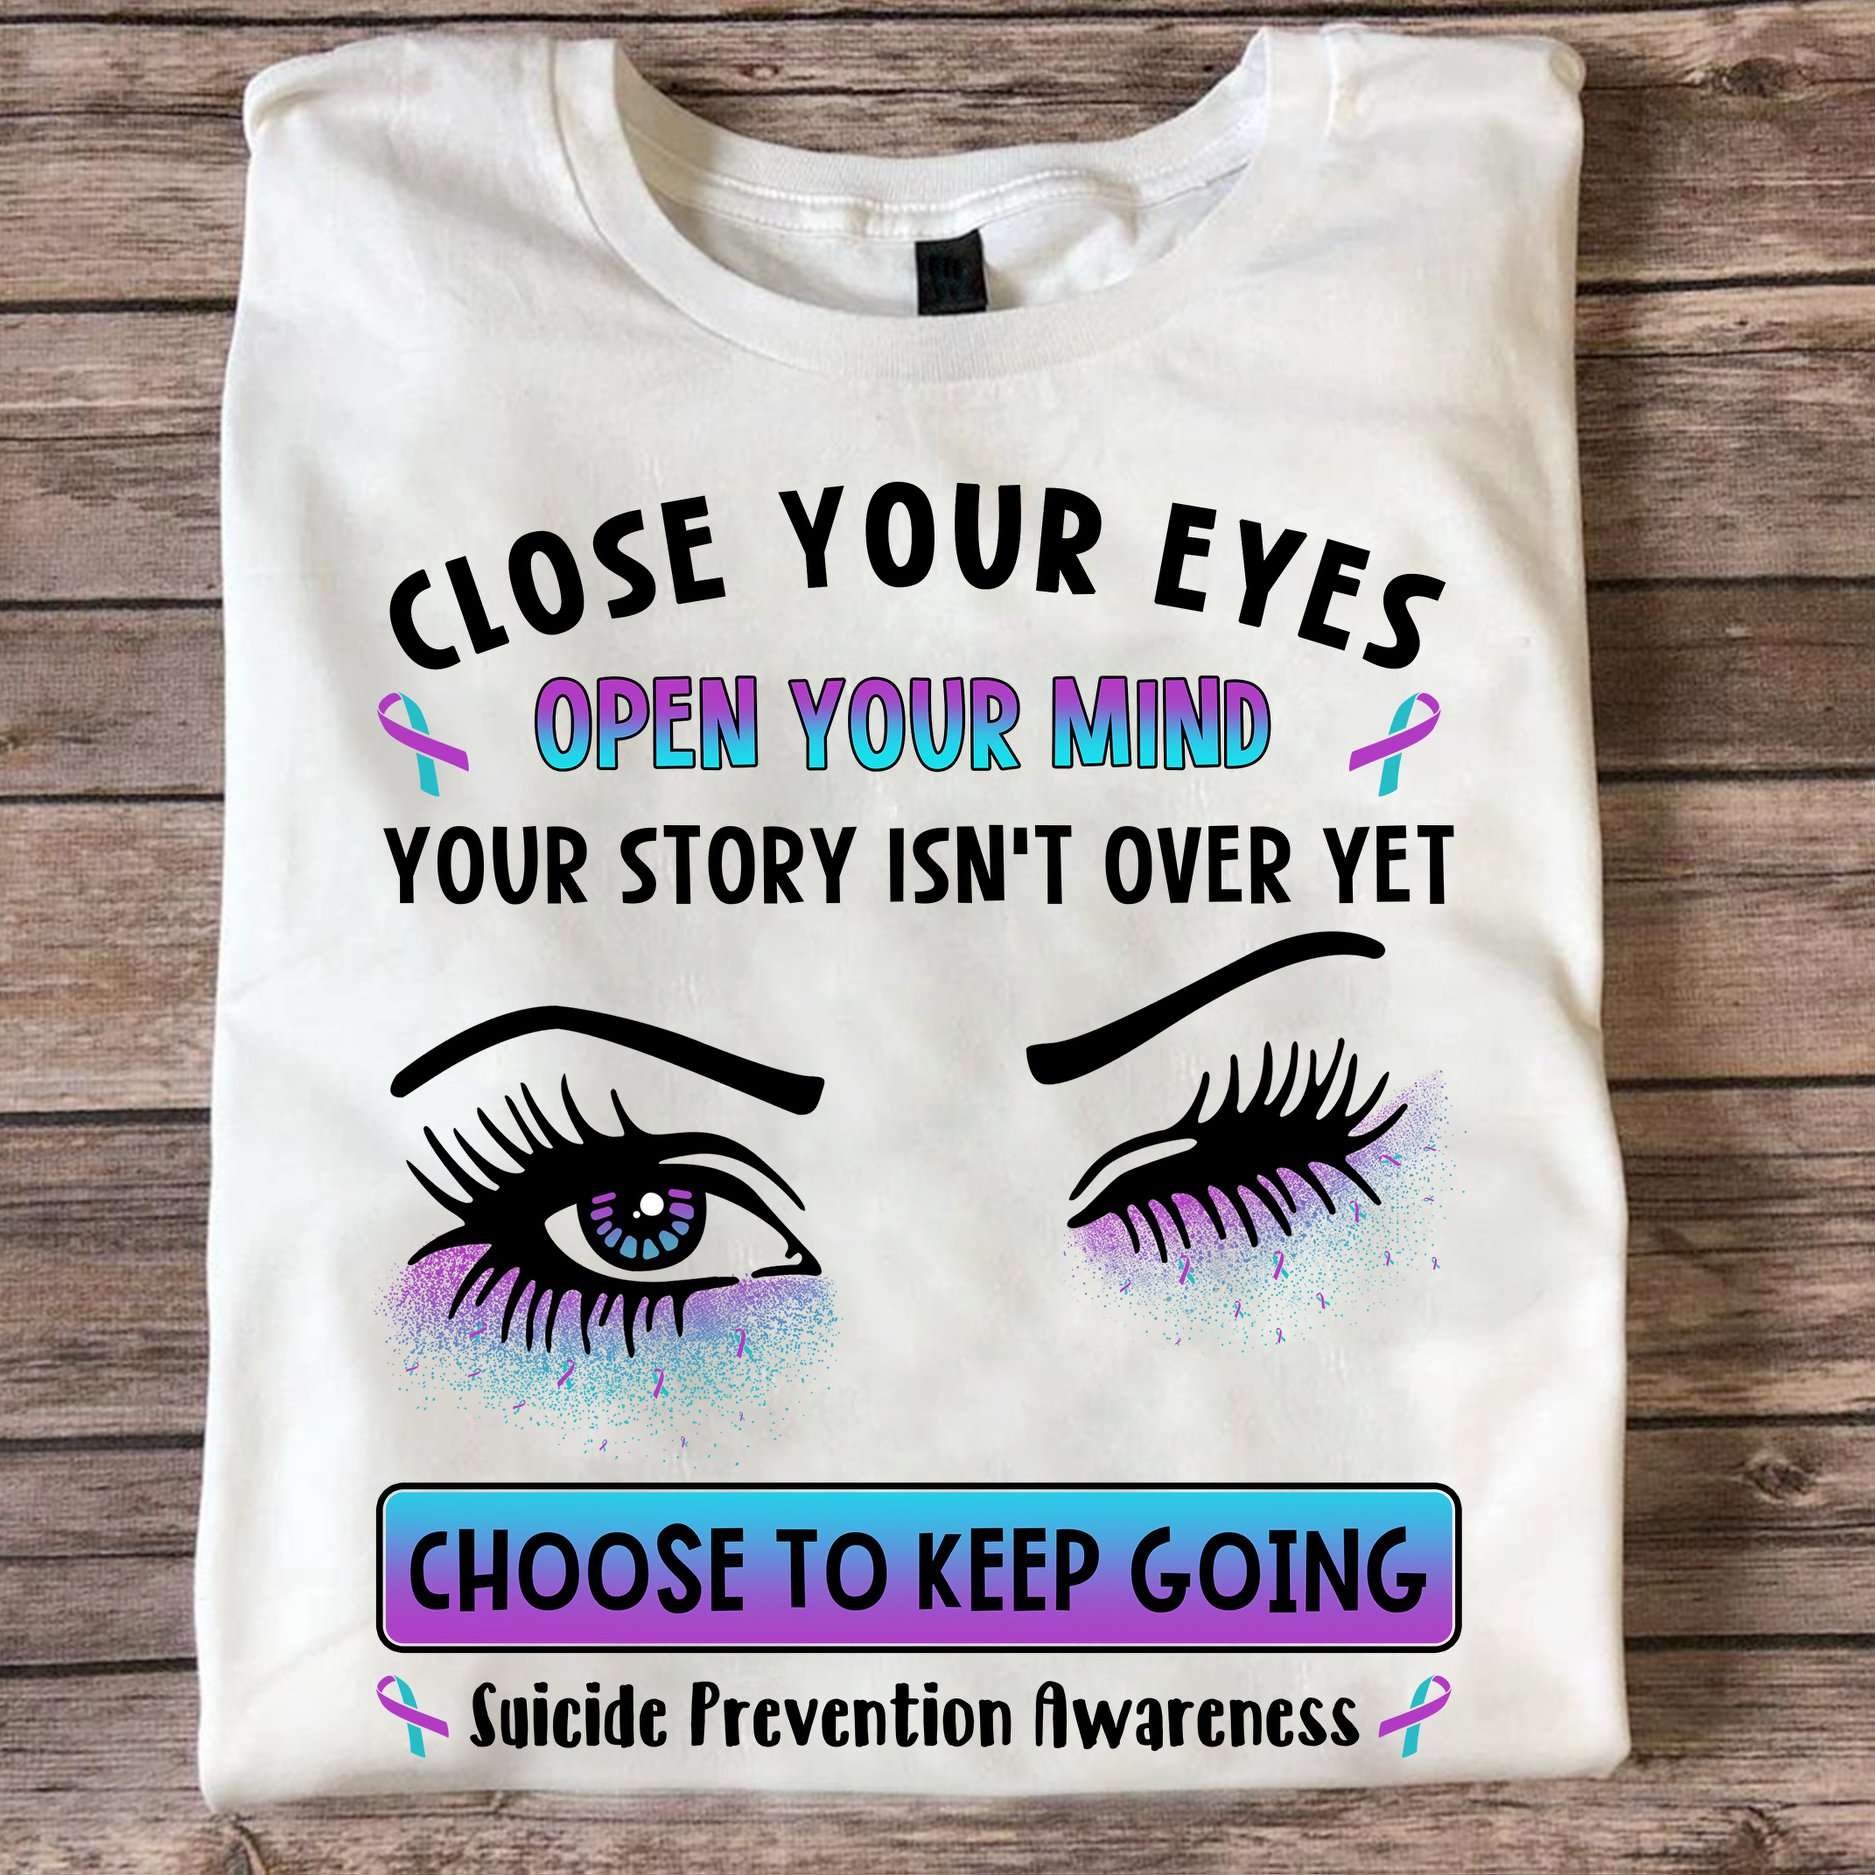 Suicide Prevention Woman Eyes - Close your eyes open your mind your story isn't over yet choose to keep going